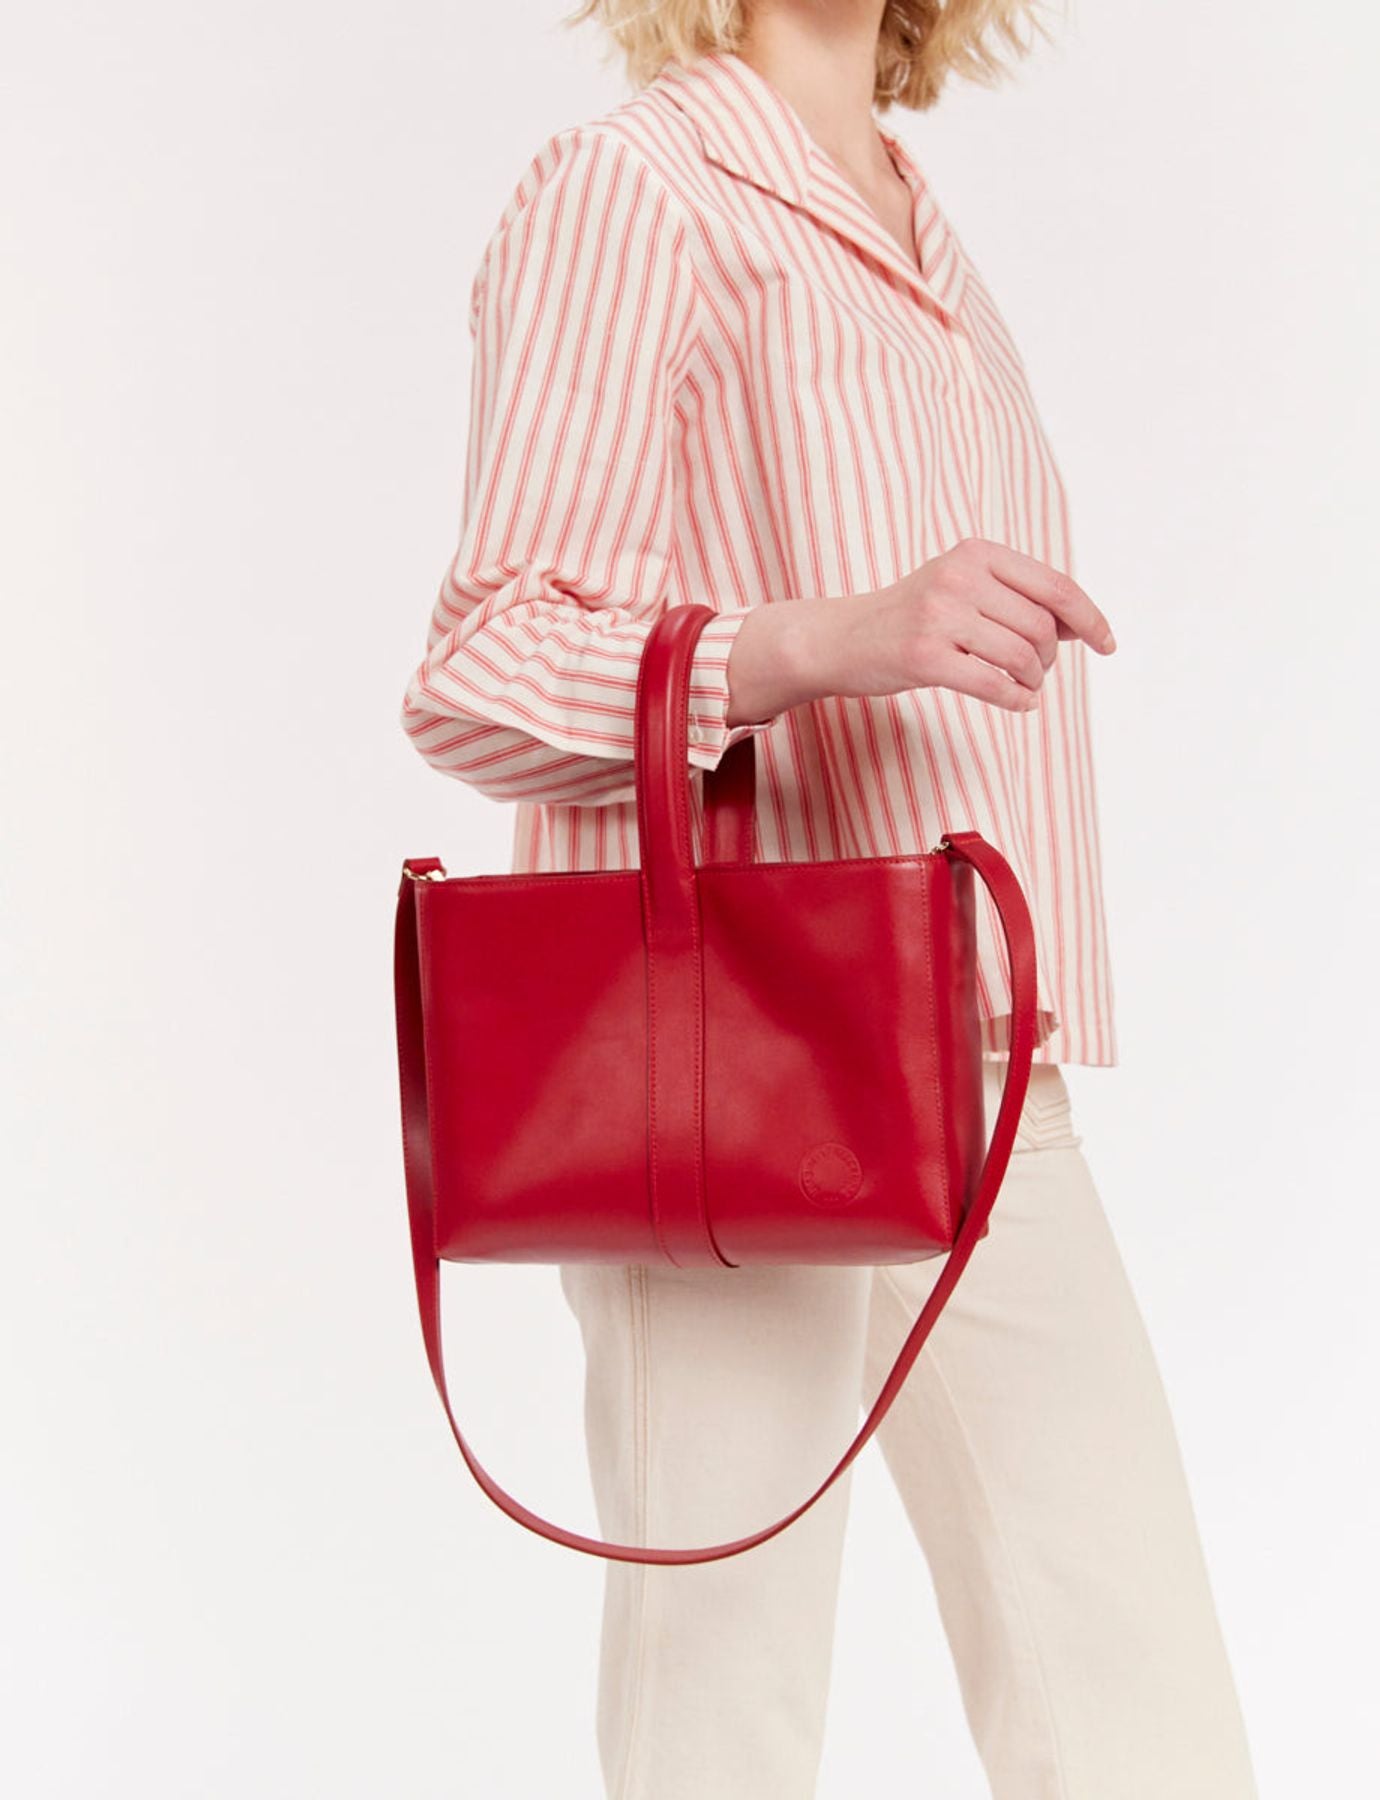 bag-leonore-s-cuir-red